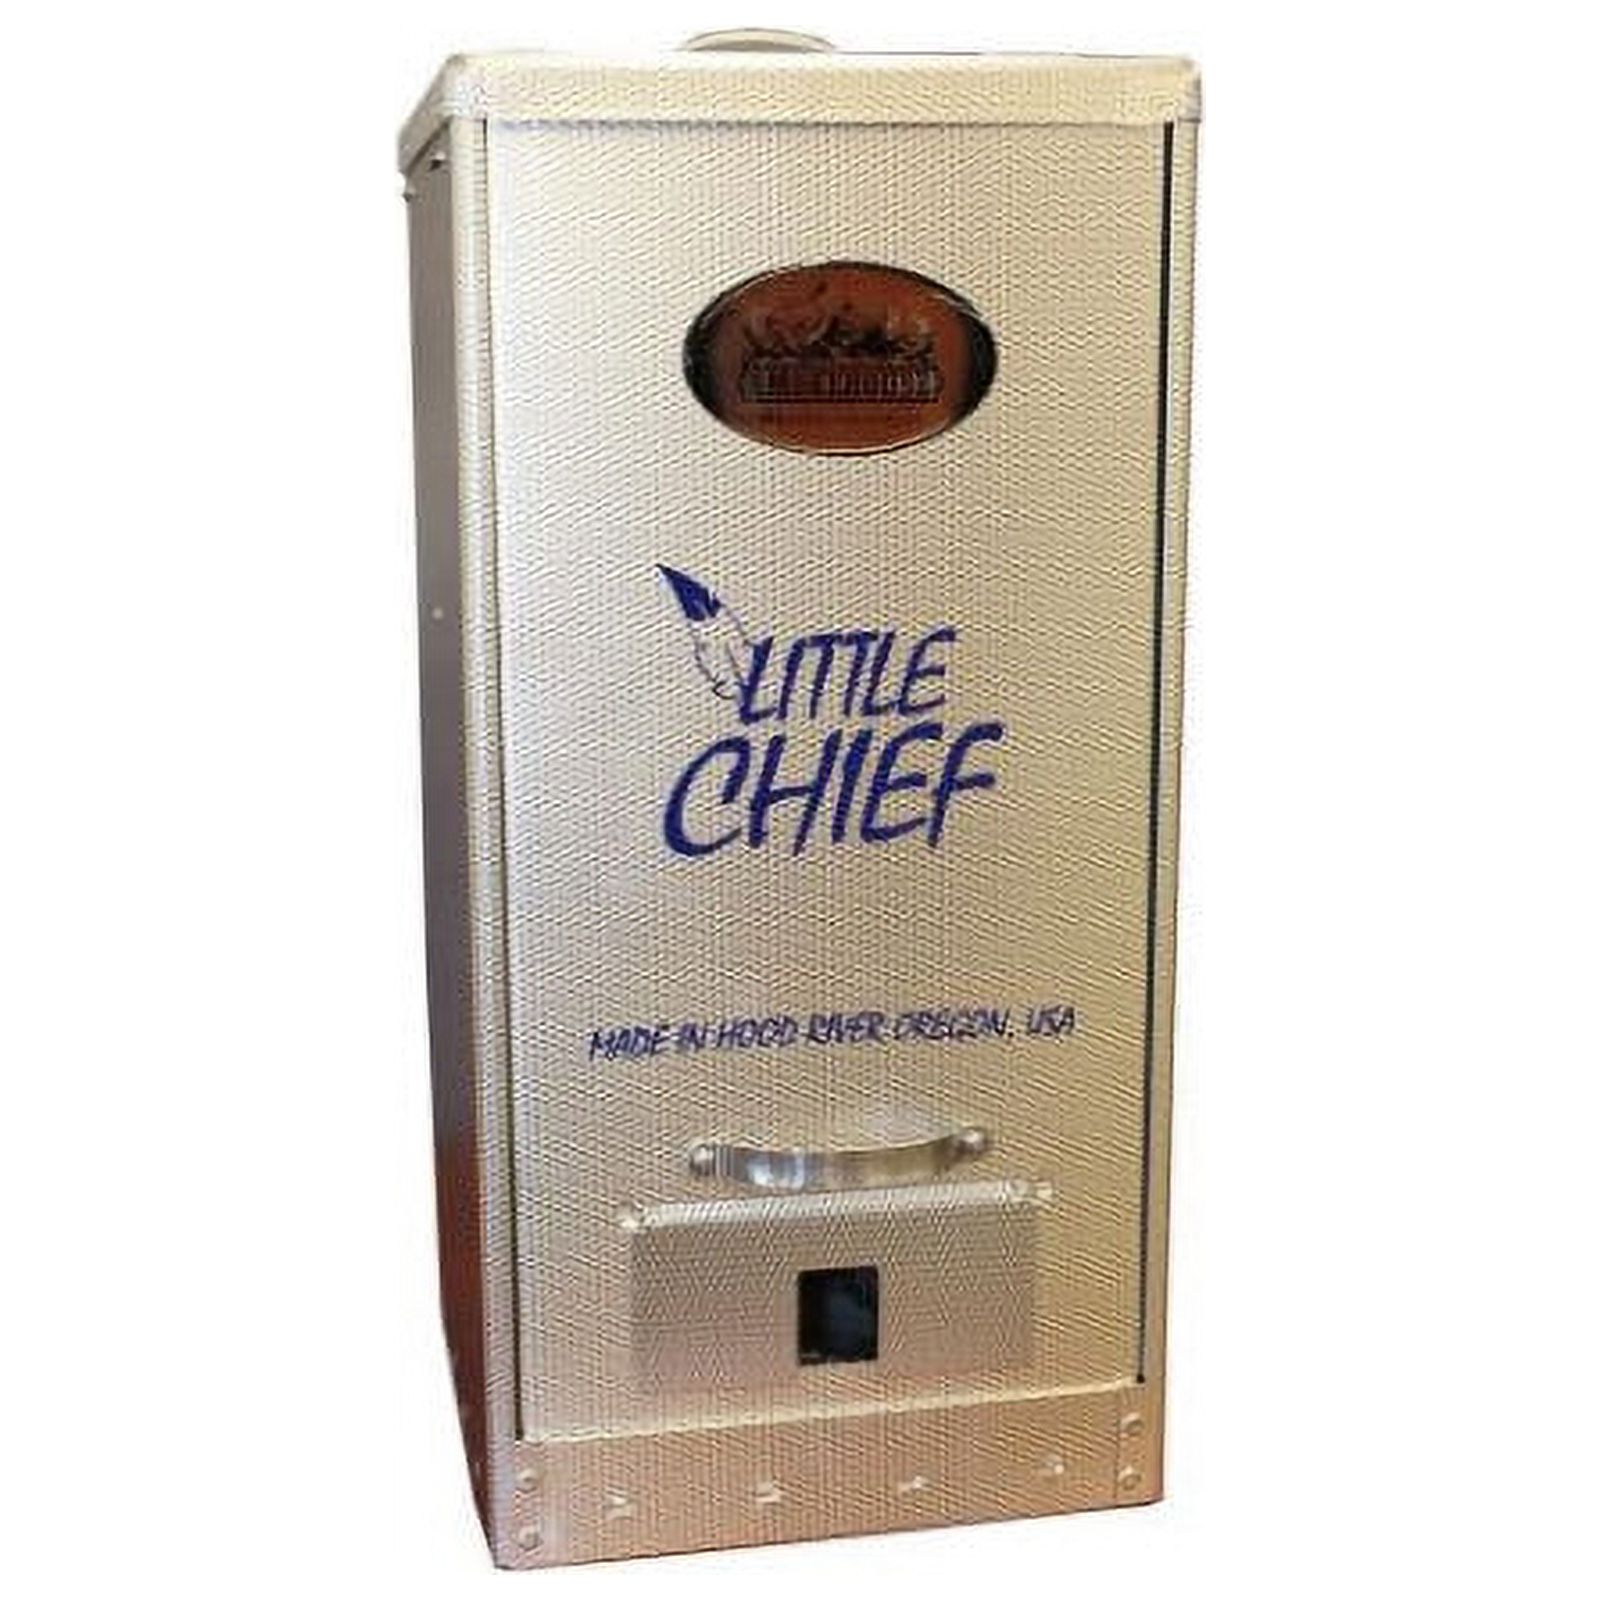 Smokehouse Products Little Chief Front Load Smoker - image 2 of 3